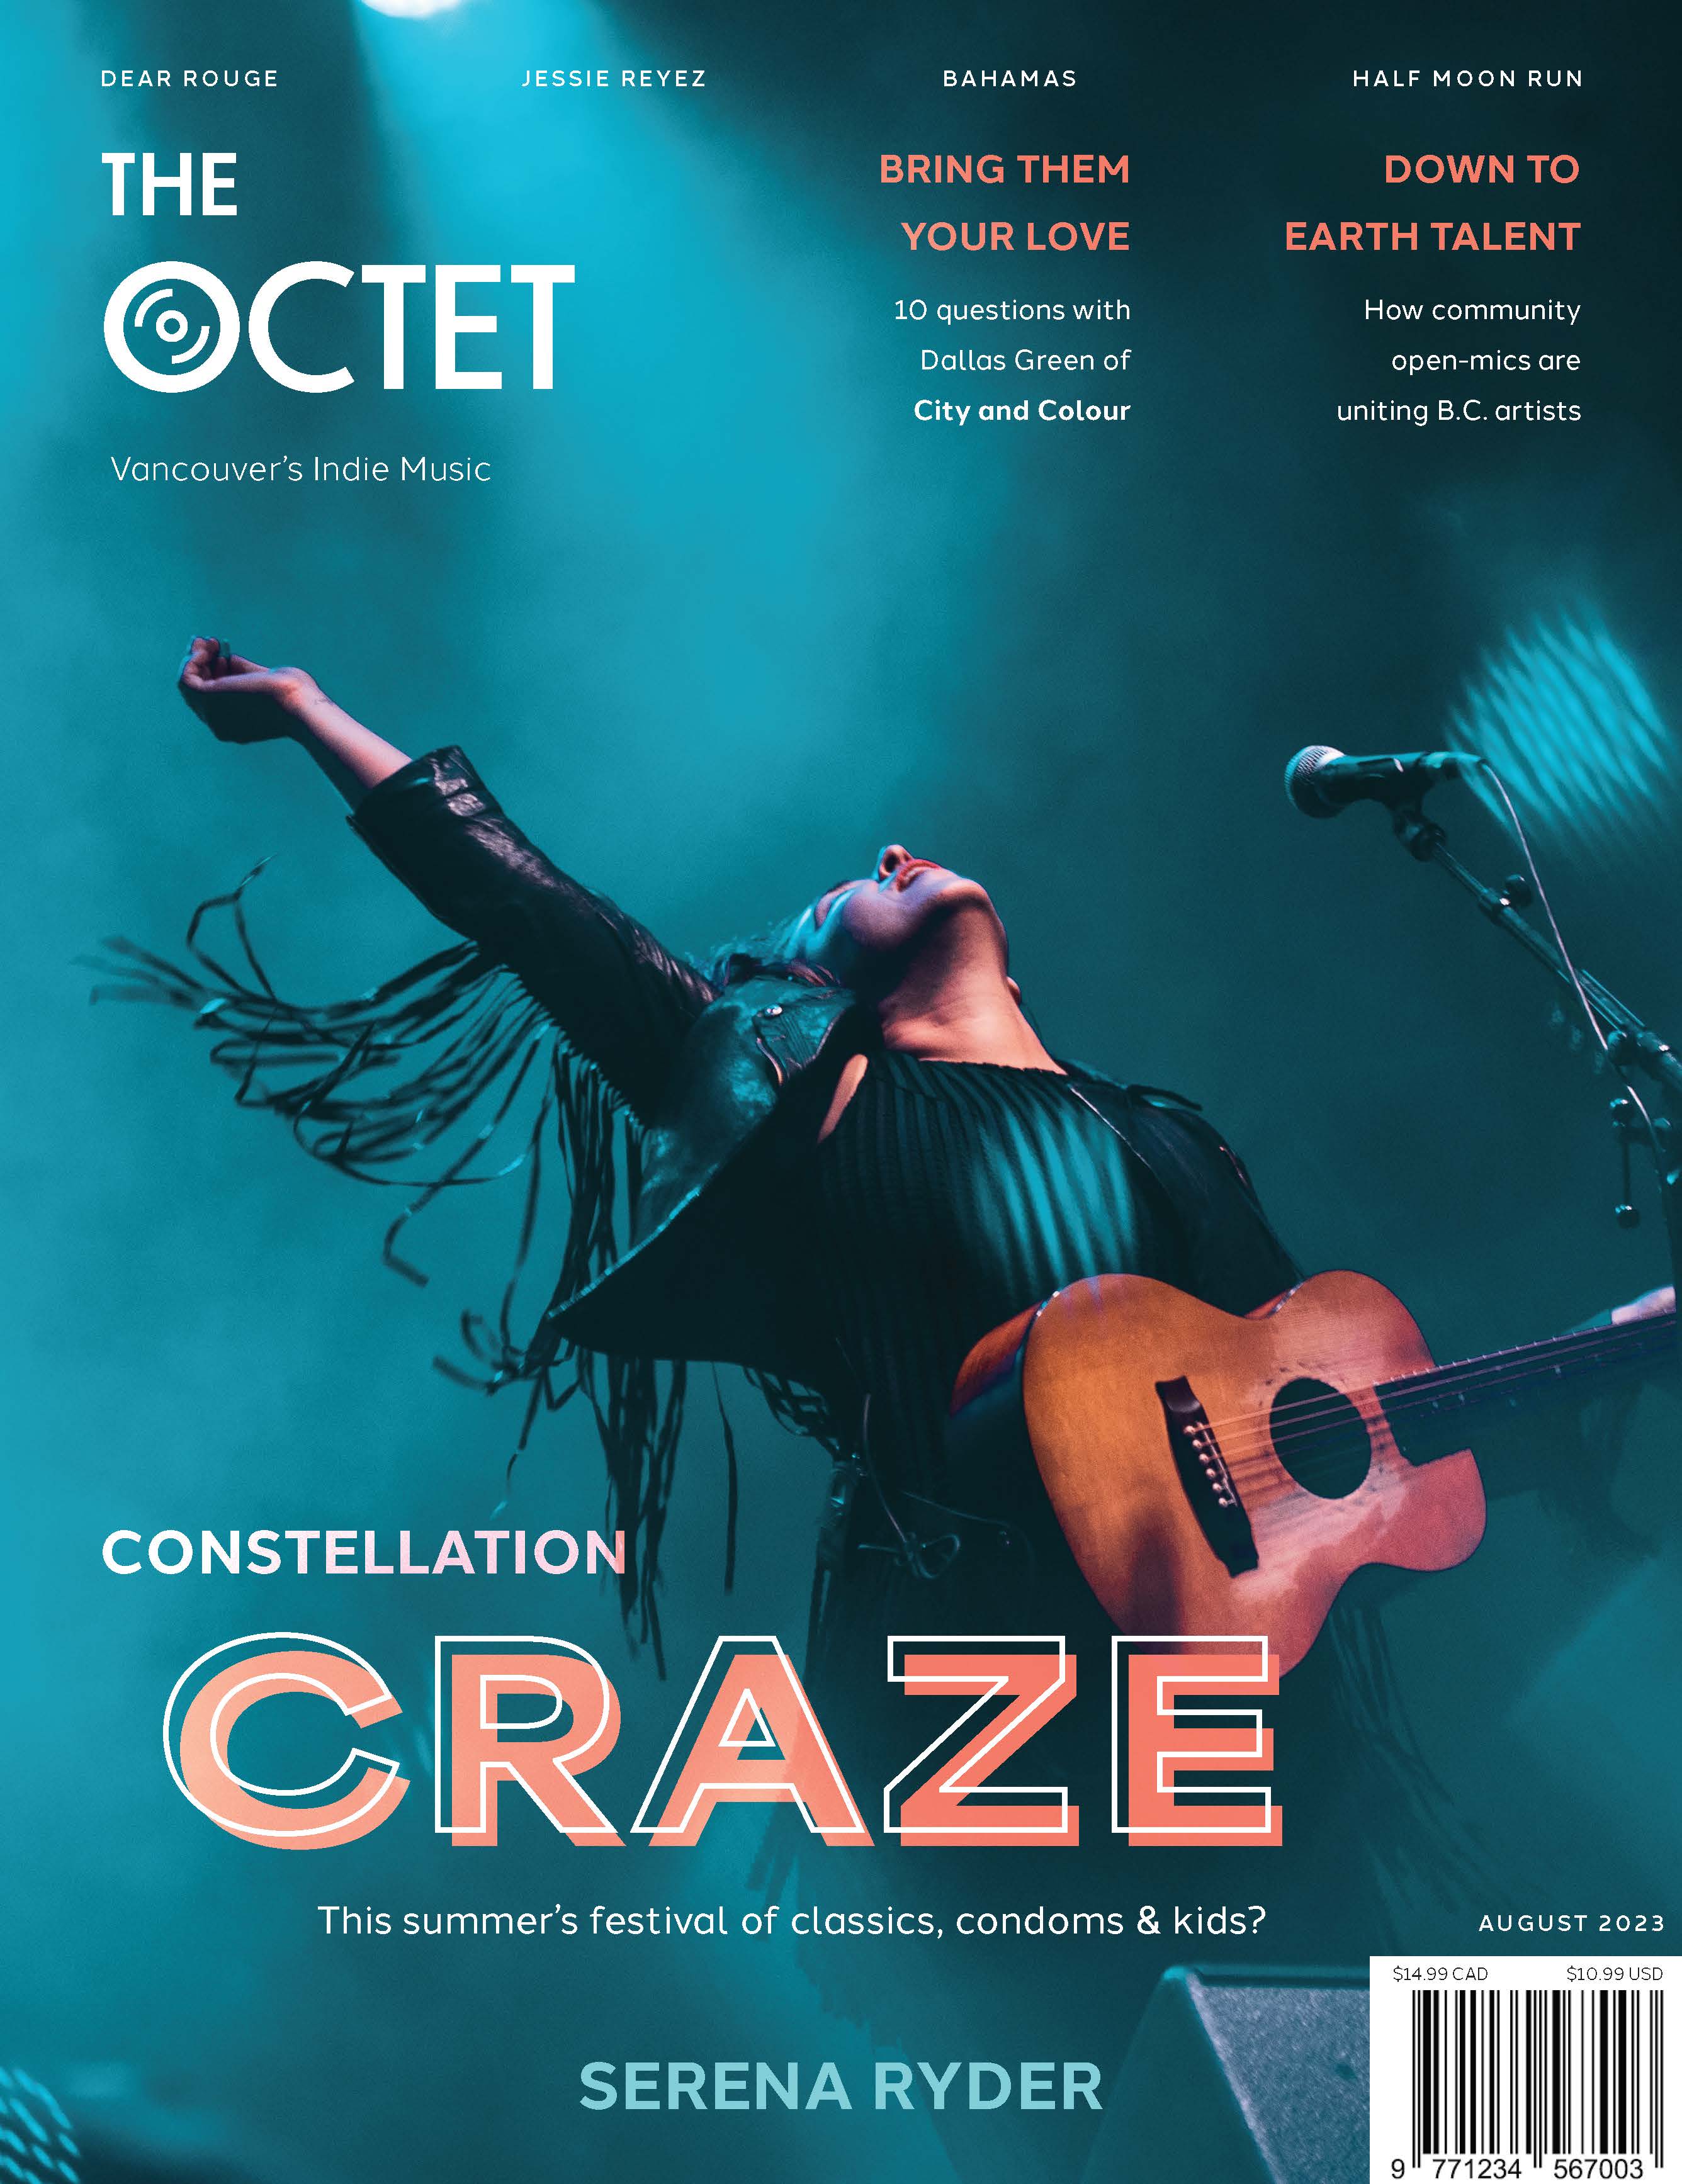 The magazine cover of The Octet.